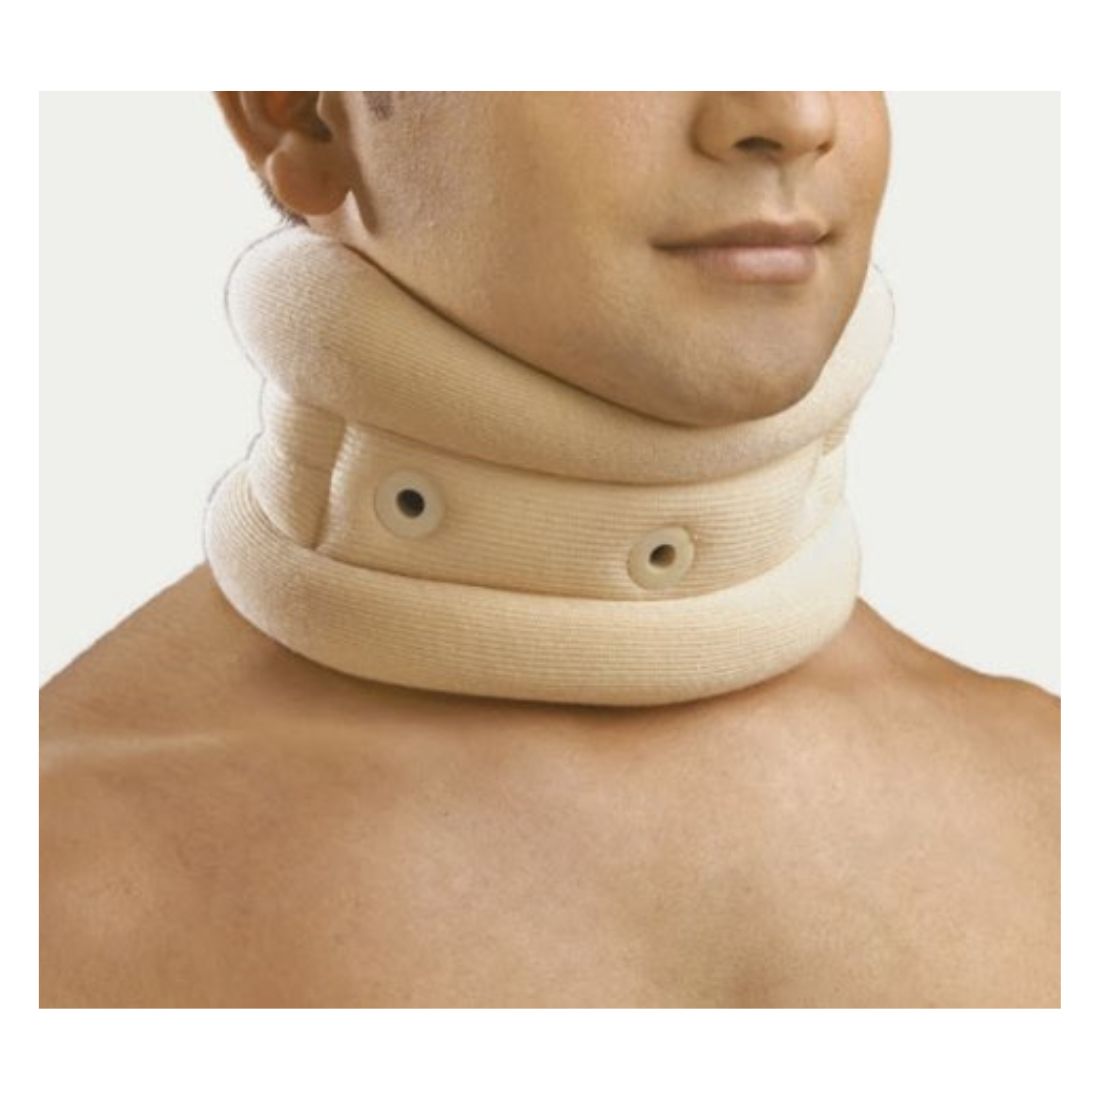 Buy neck collar cervical soft for best price in India